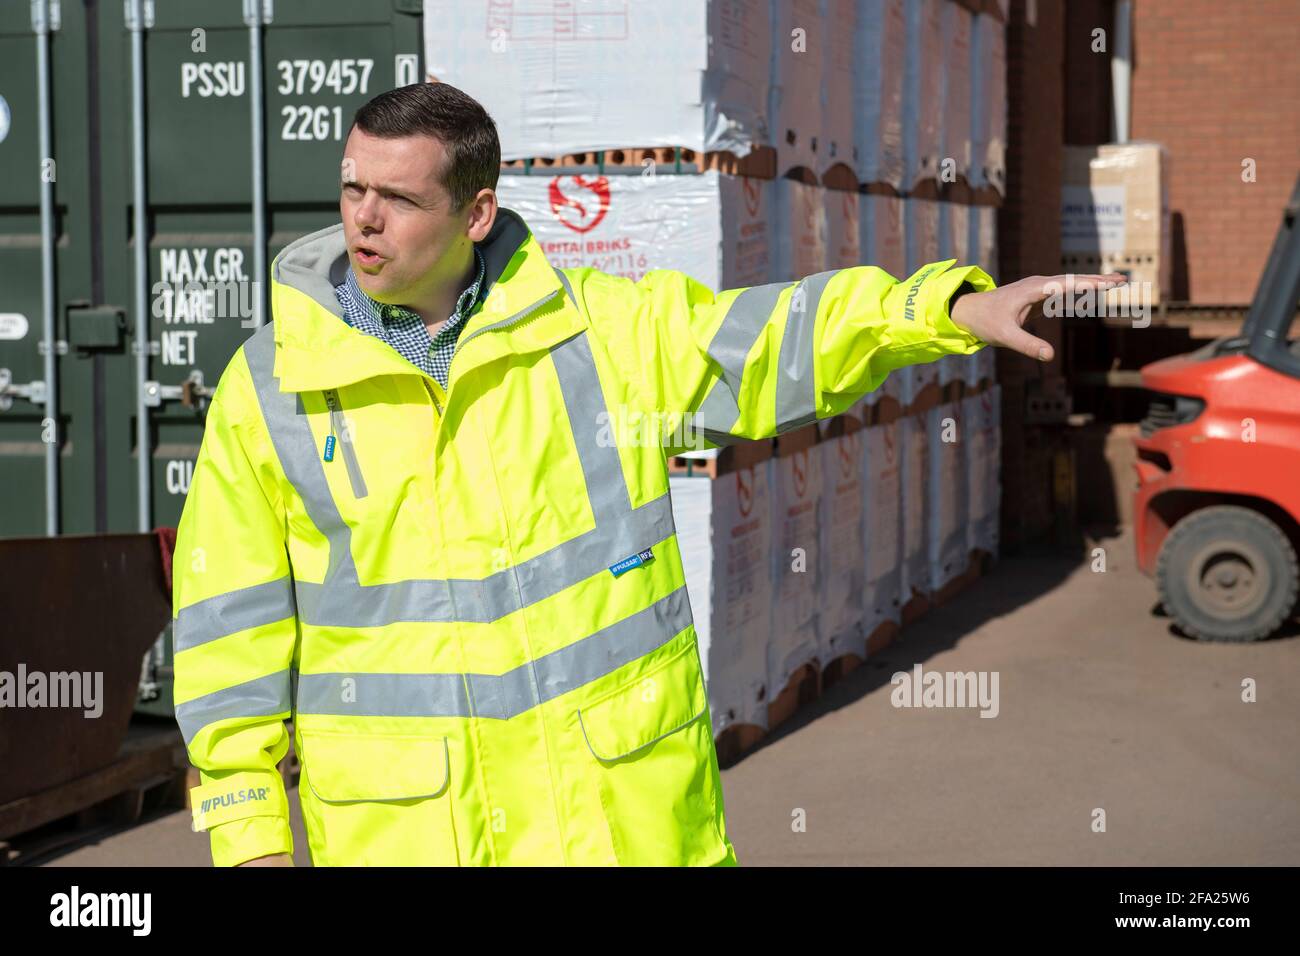 Blantyre, Scotland, UK. 22 April 2021. PICTURED: Douglas Ross MP, Leader of the Scottish Conservative and Unionist Party seen visiting Raeburn Brick Ltd in Blantyre, a construction company to highlight the party's plans to create jobs and rebuild Scotland. Scottish Conservative plans for rebuilding Scotland's economy would create hundreds of thousands of jobs over the next Scottish Parliament term. Analysis by the party found their manifesto proposals could deliver at least 200,000 new jobs. Credit: Colin Fisher/Alamy Live News. Stock Photo